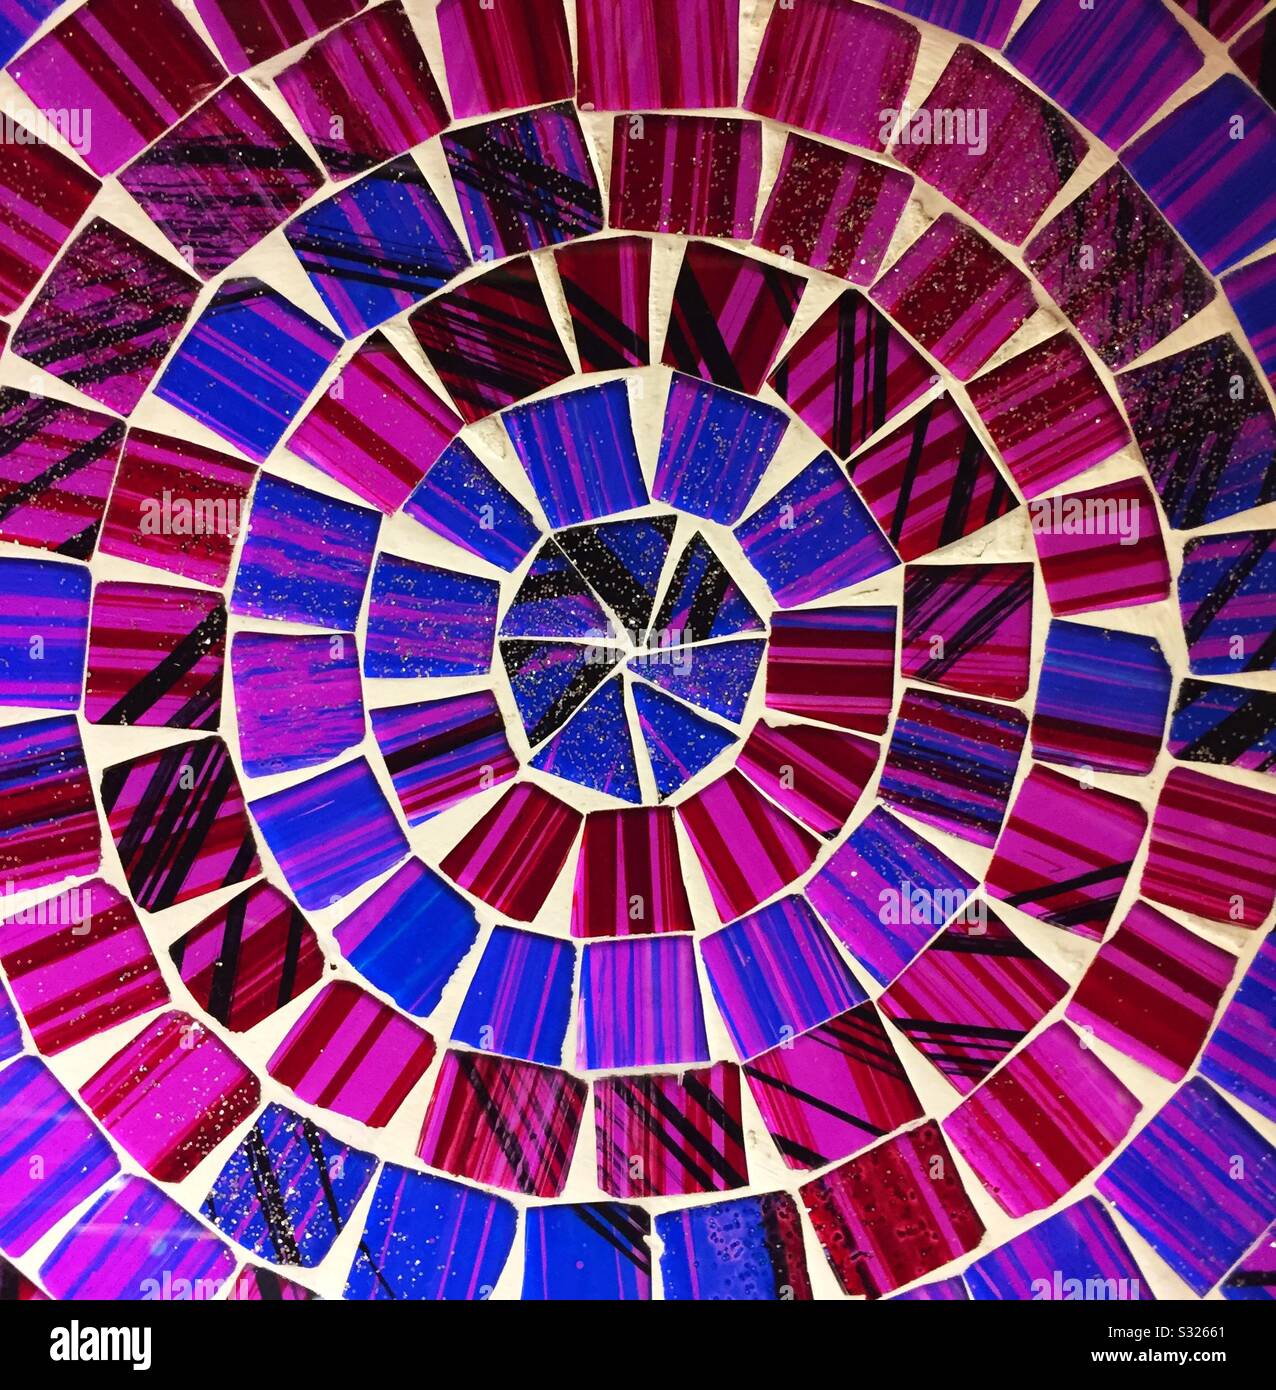 Vibrant and colourful mosaic tiles in a circular pattern with purples and blues in a colourful ceramic background image Stock Photo